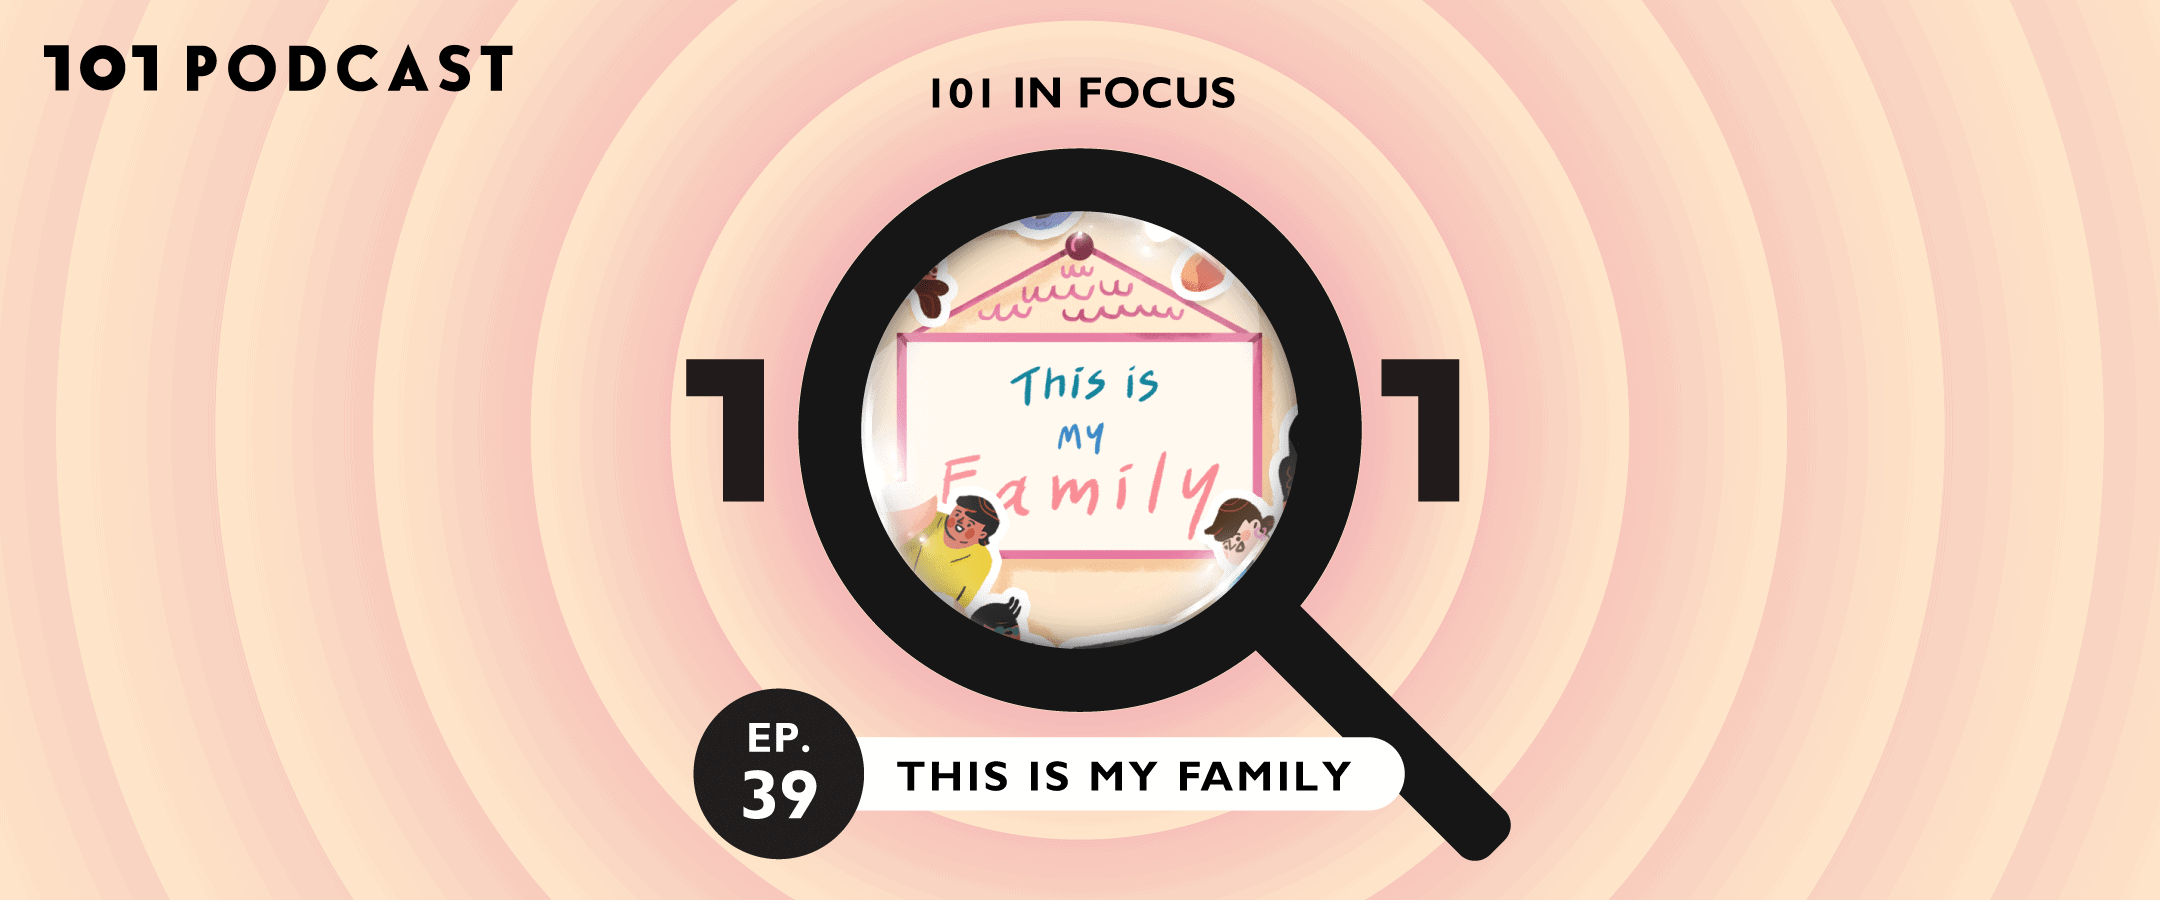 101 in focus: This is my family